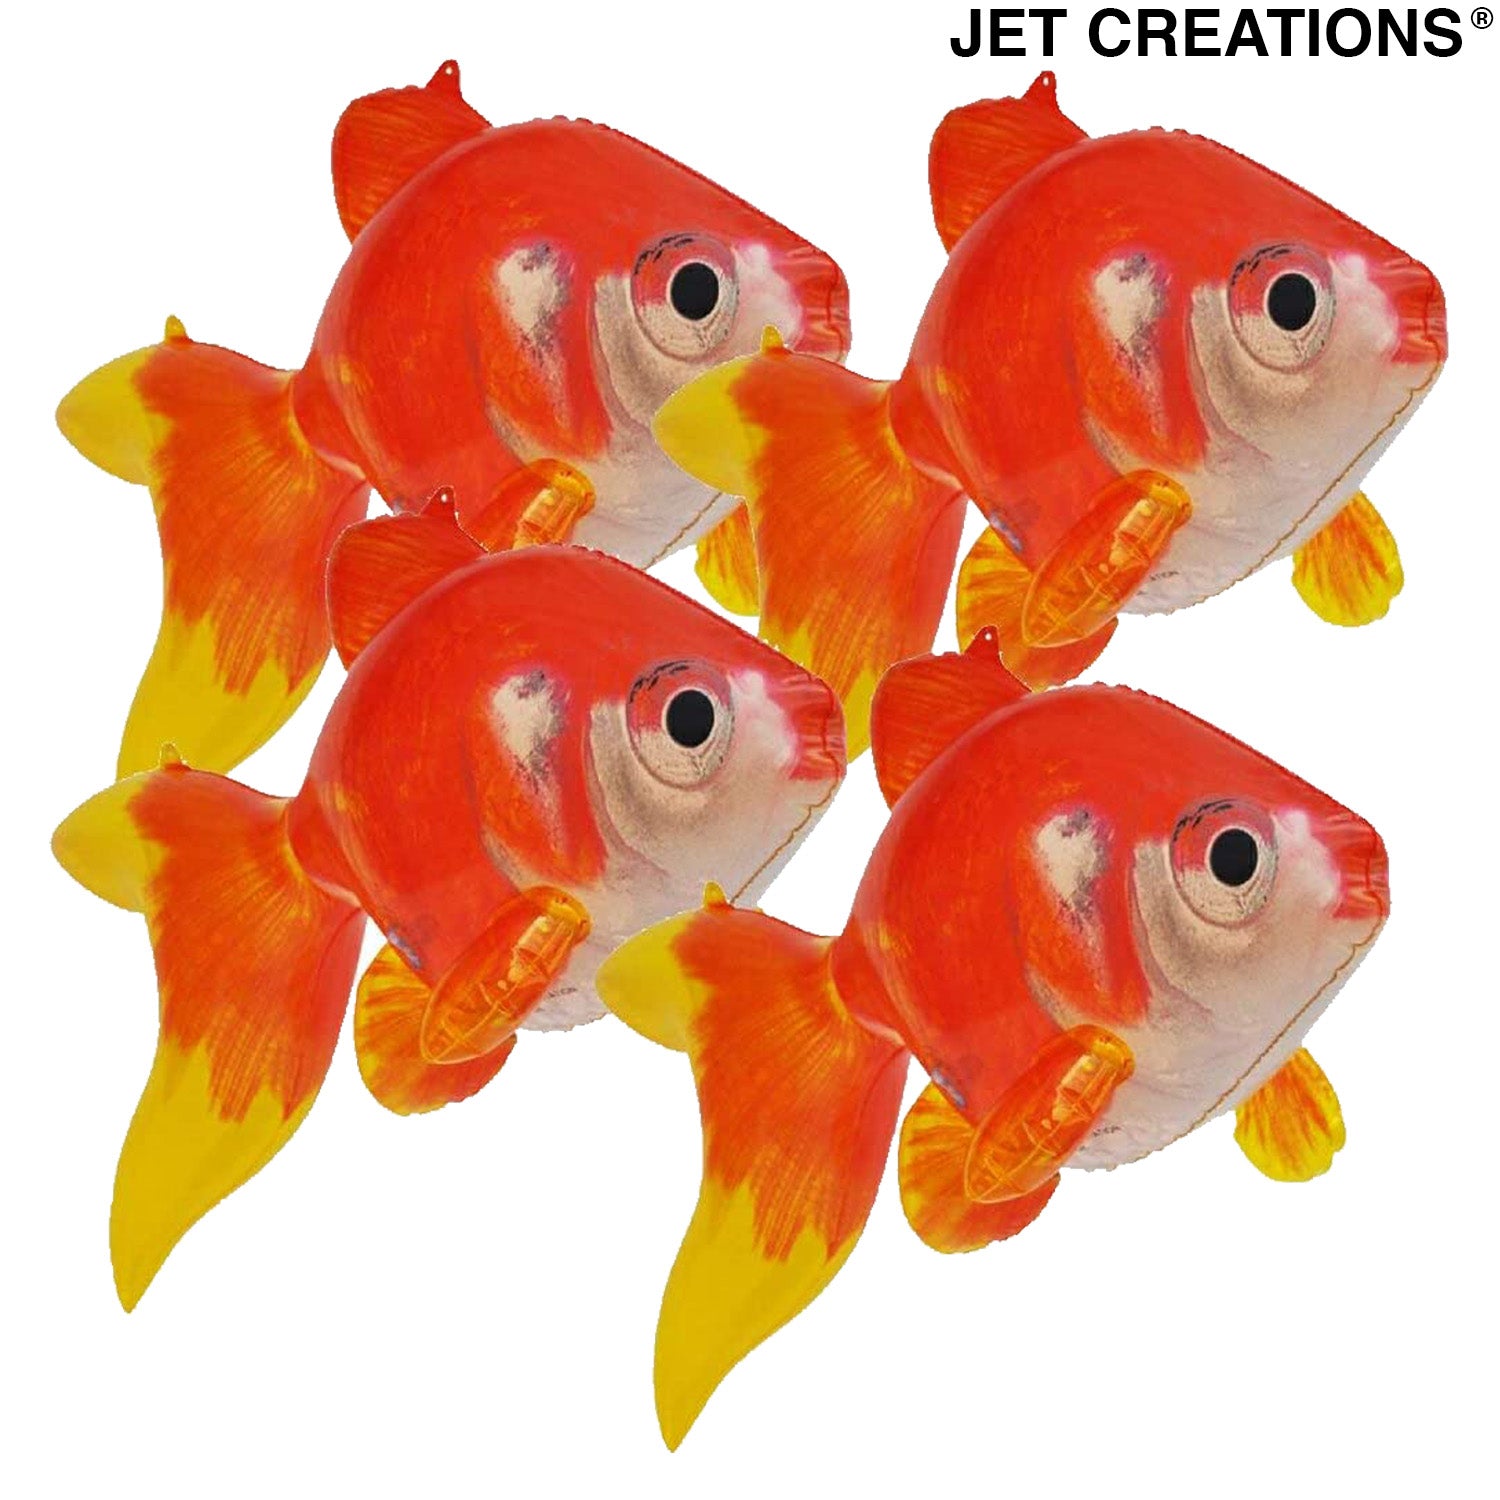 Jet Creations Inflatable 20 inch Long Pack of 4 Gold Fish,Party